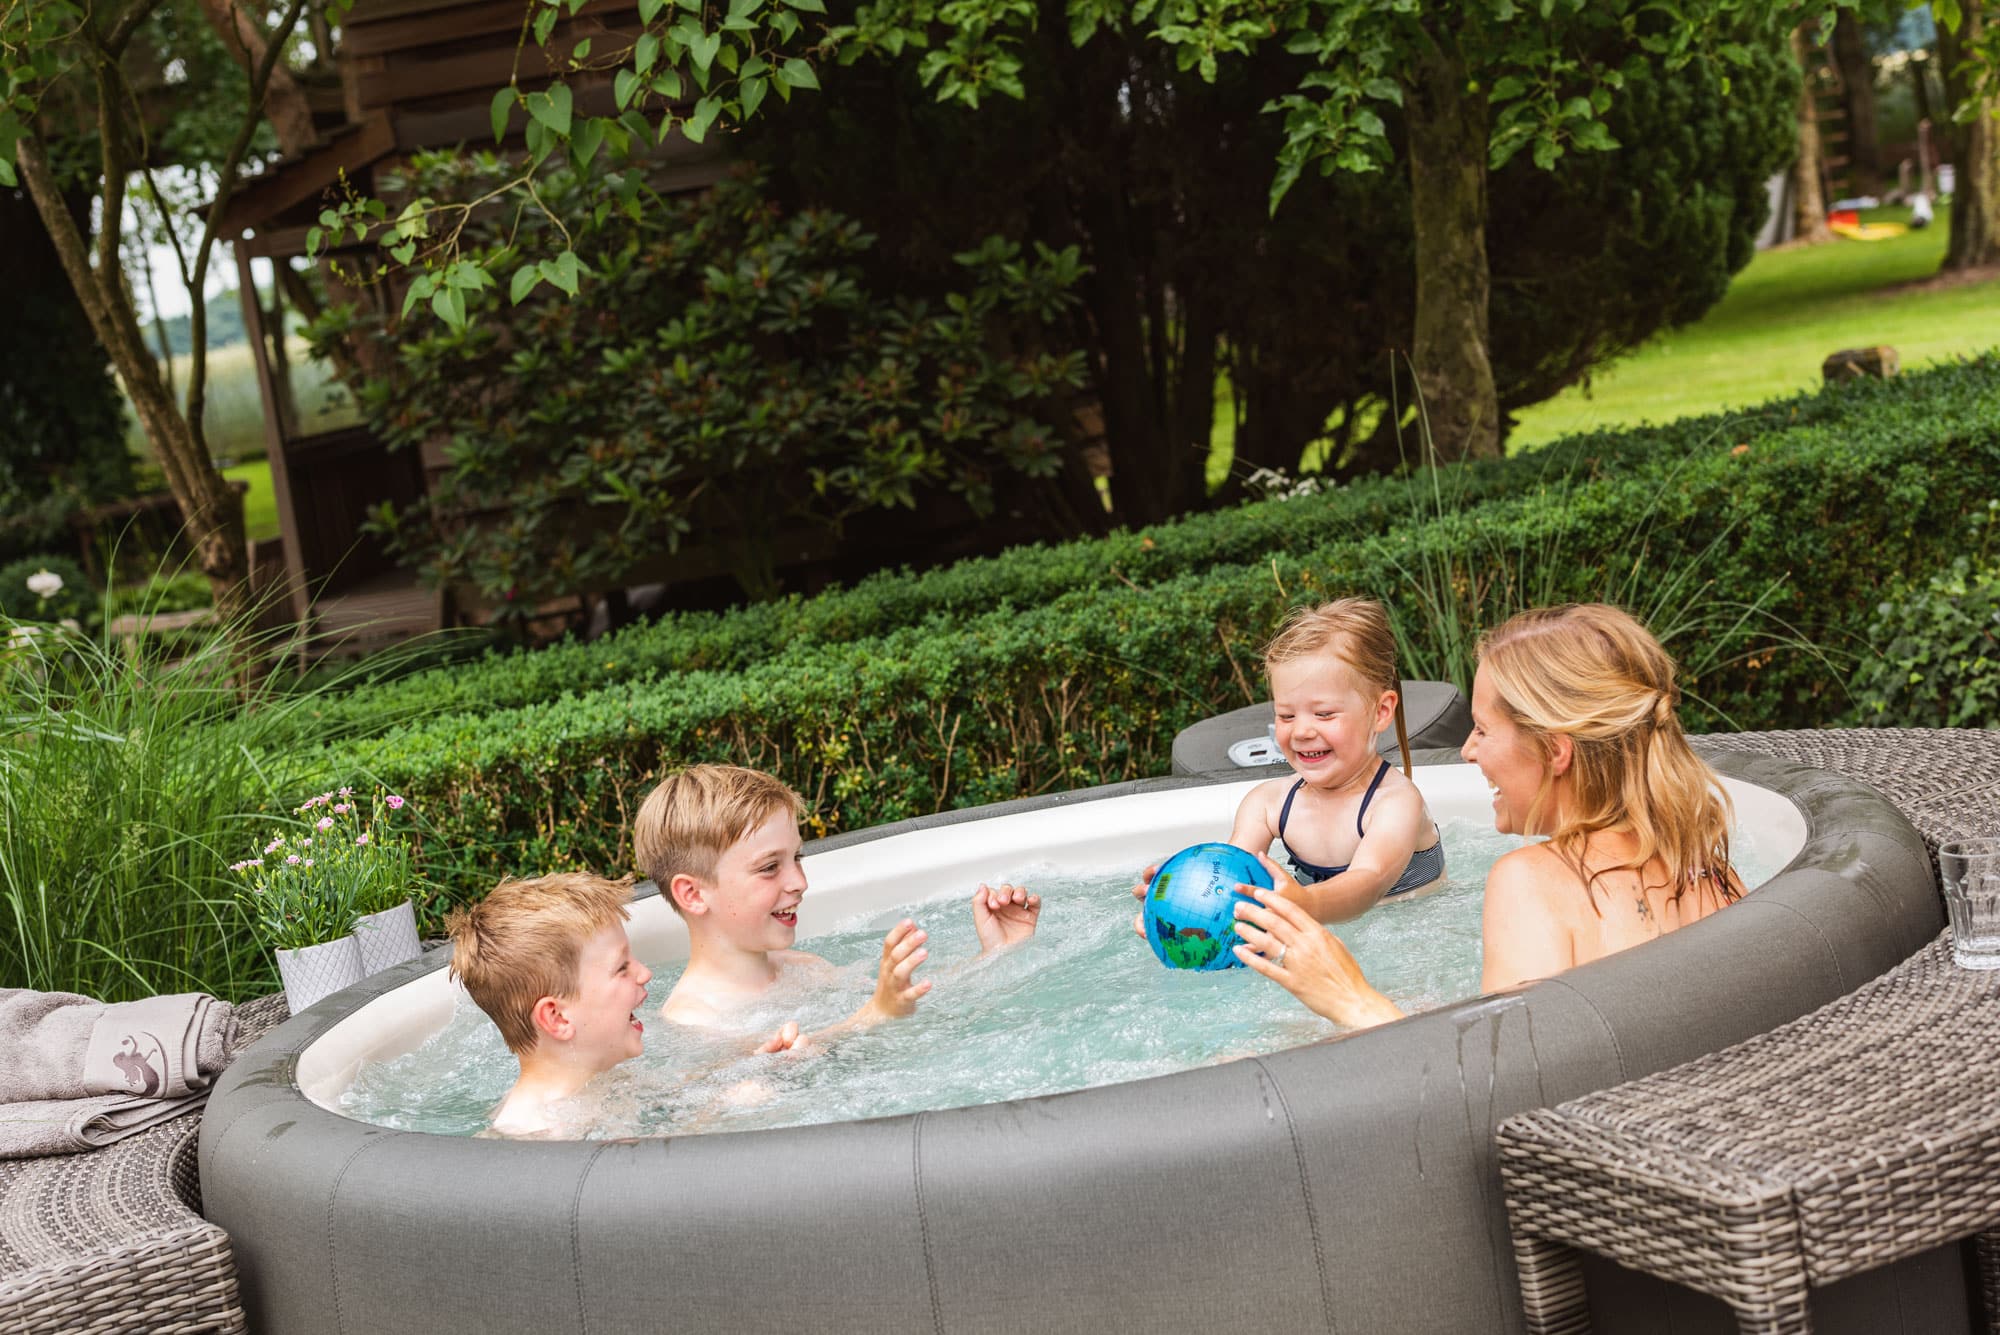 A Softub Spa for the whole family